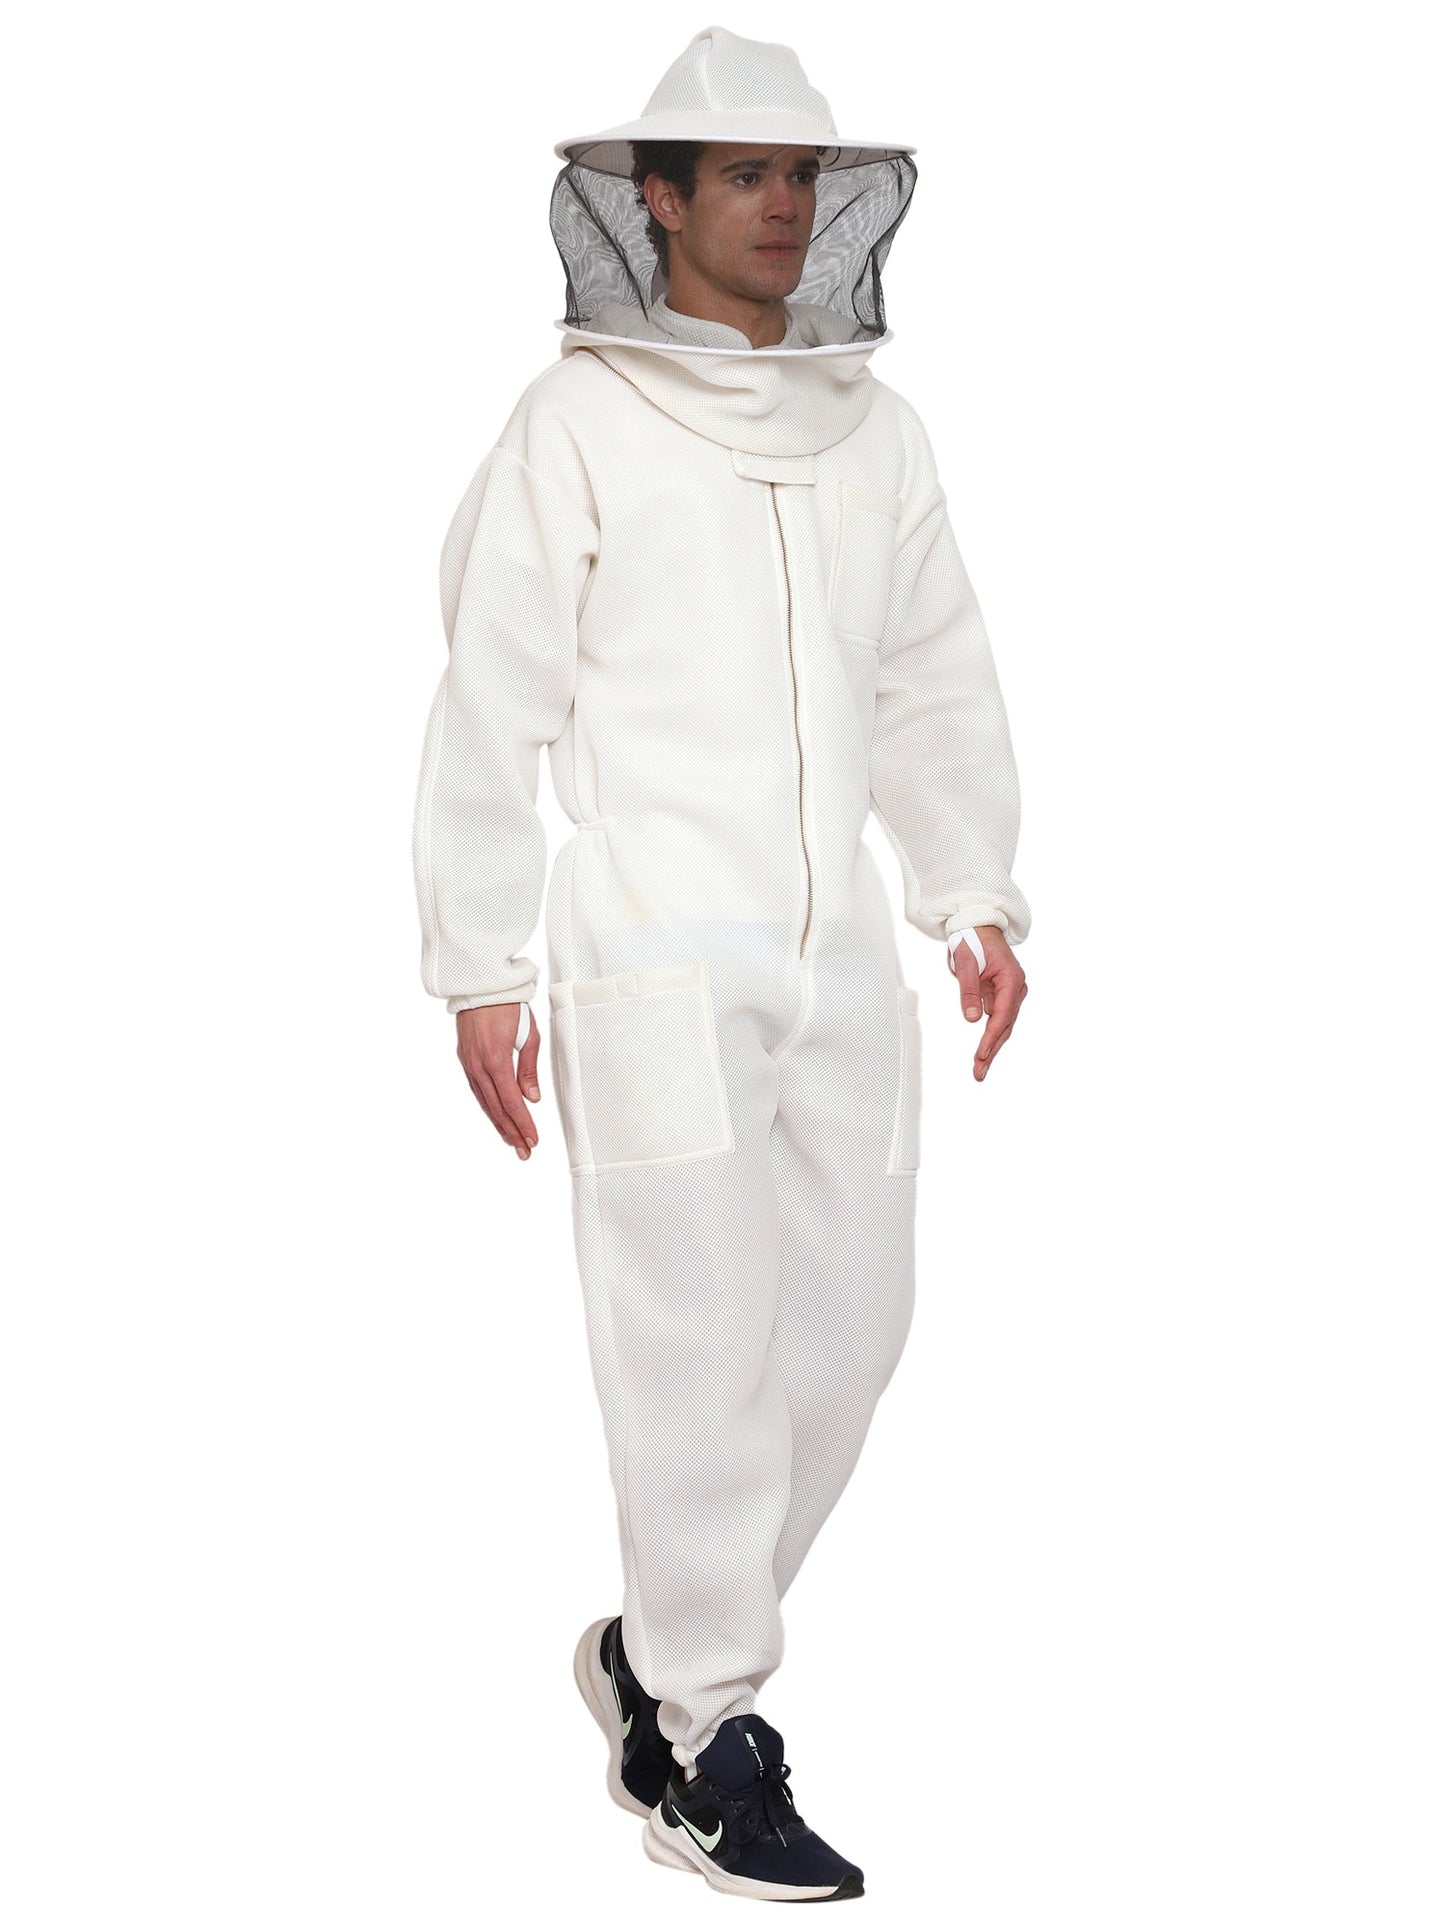 Beeattire Airmesh Ventilated beekeeping Suit White Color with Round Hood For Men